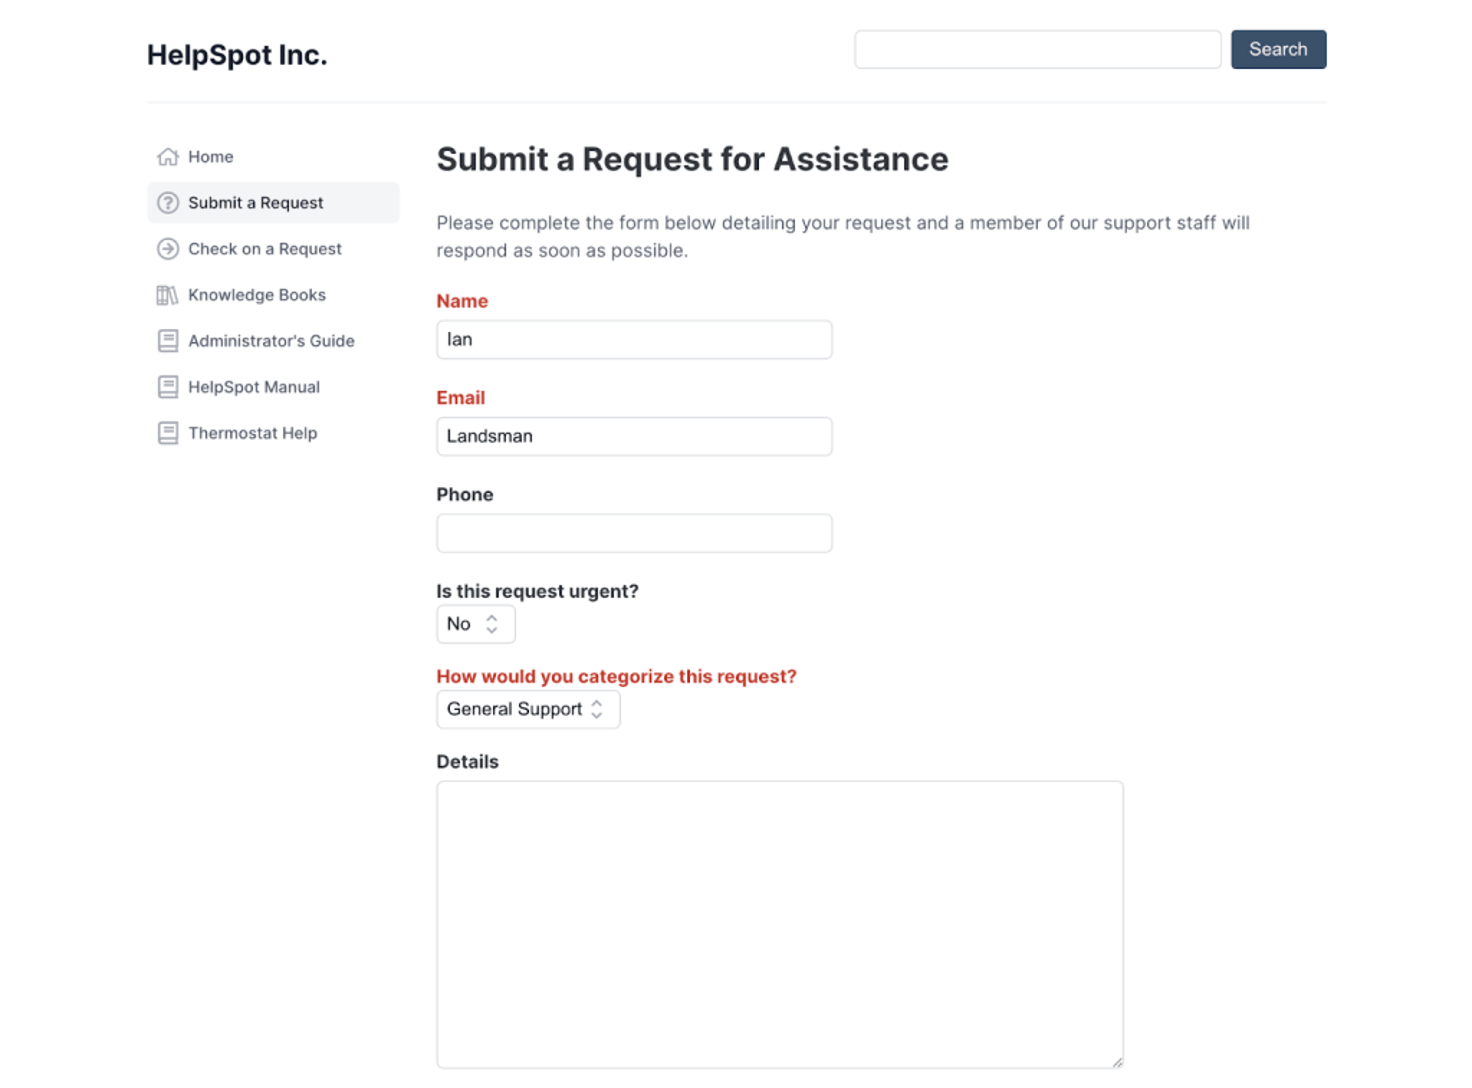 Submitting a Request for Assistance in HelpSpot